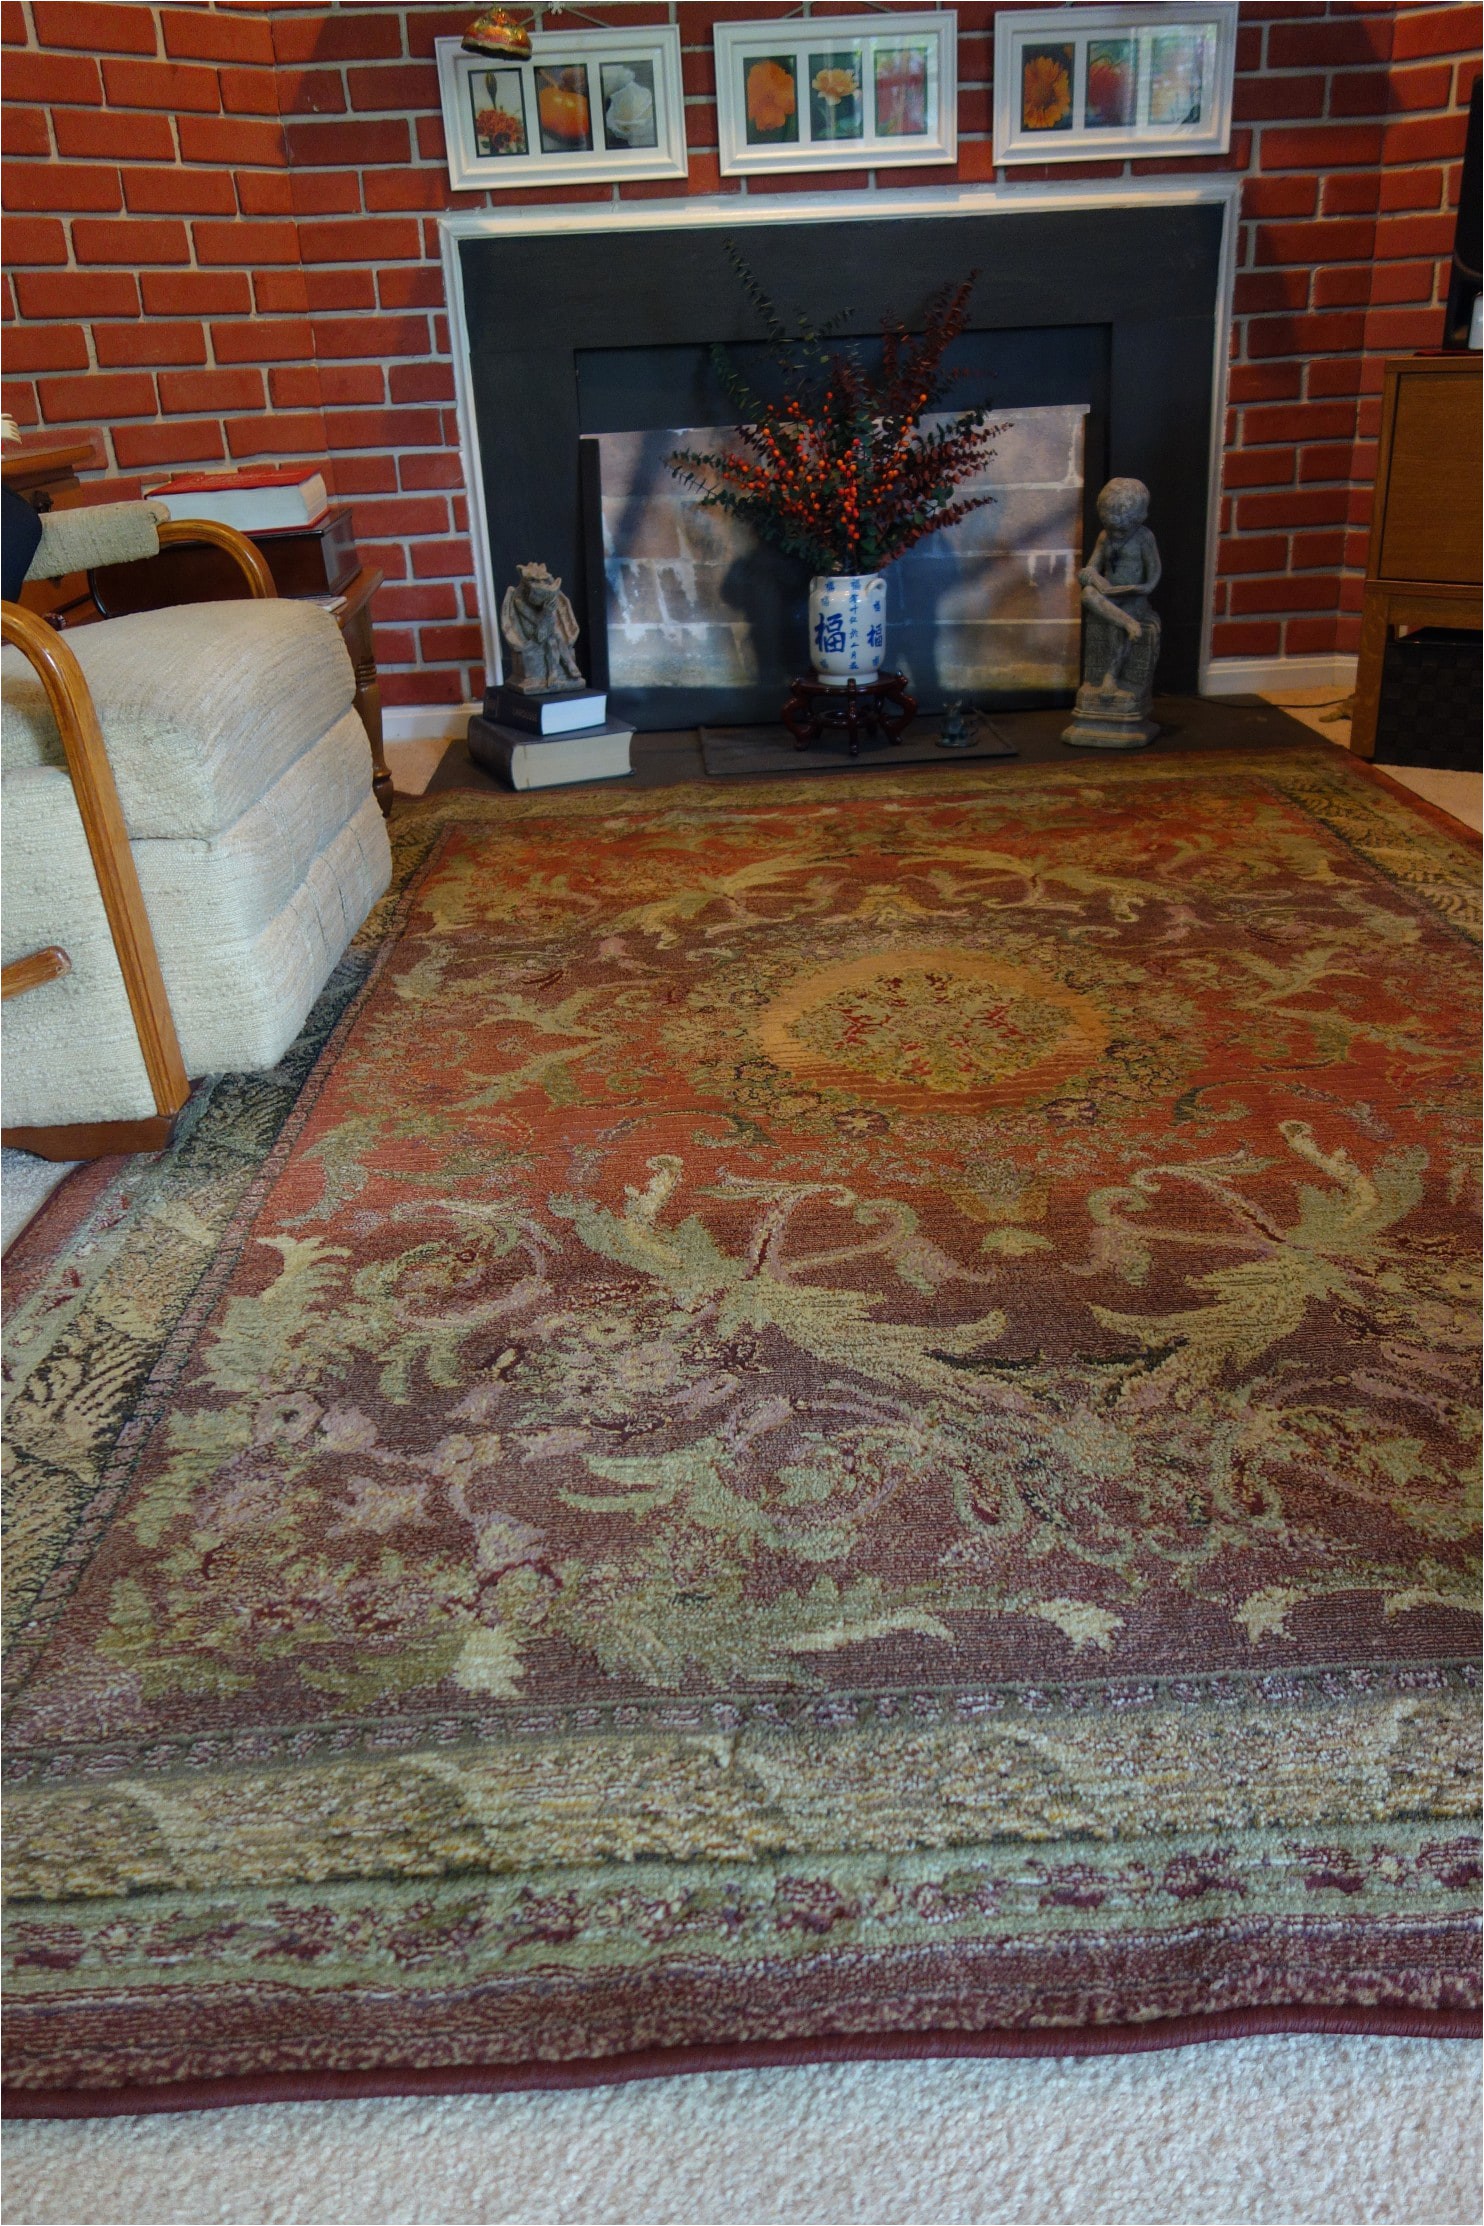 Carpet Pad Size for area Rug How to Keep An area Rug From Creeping On A Carpeted Floor